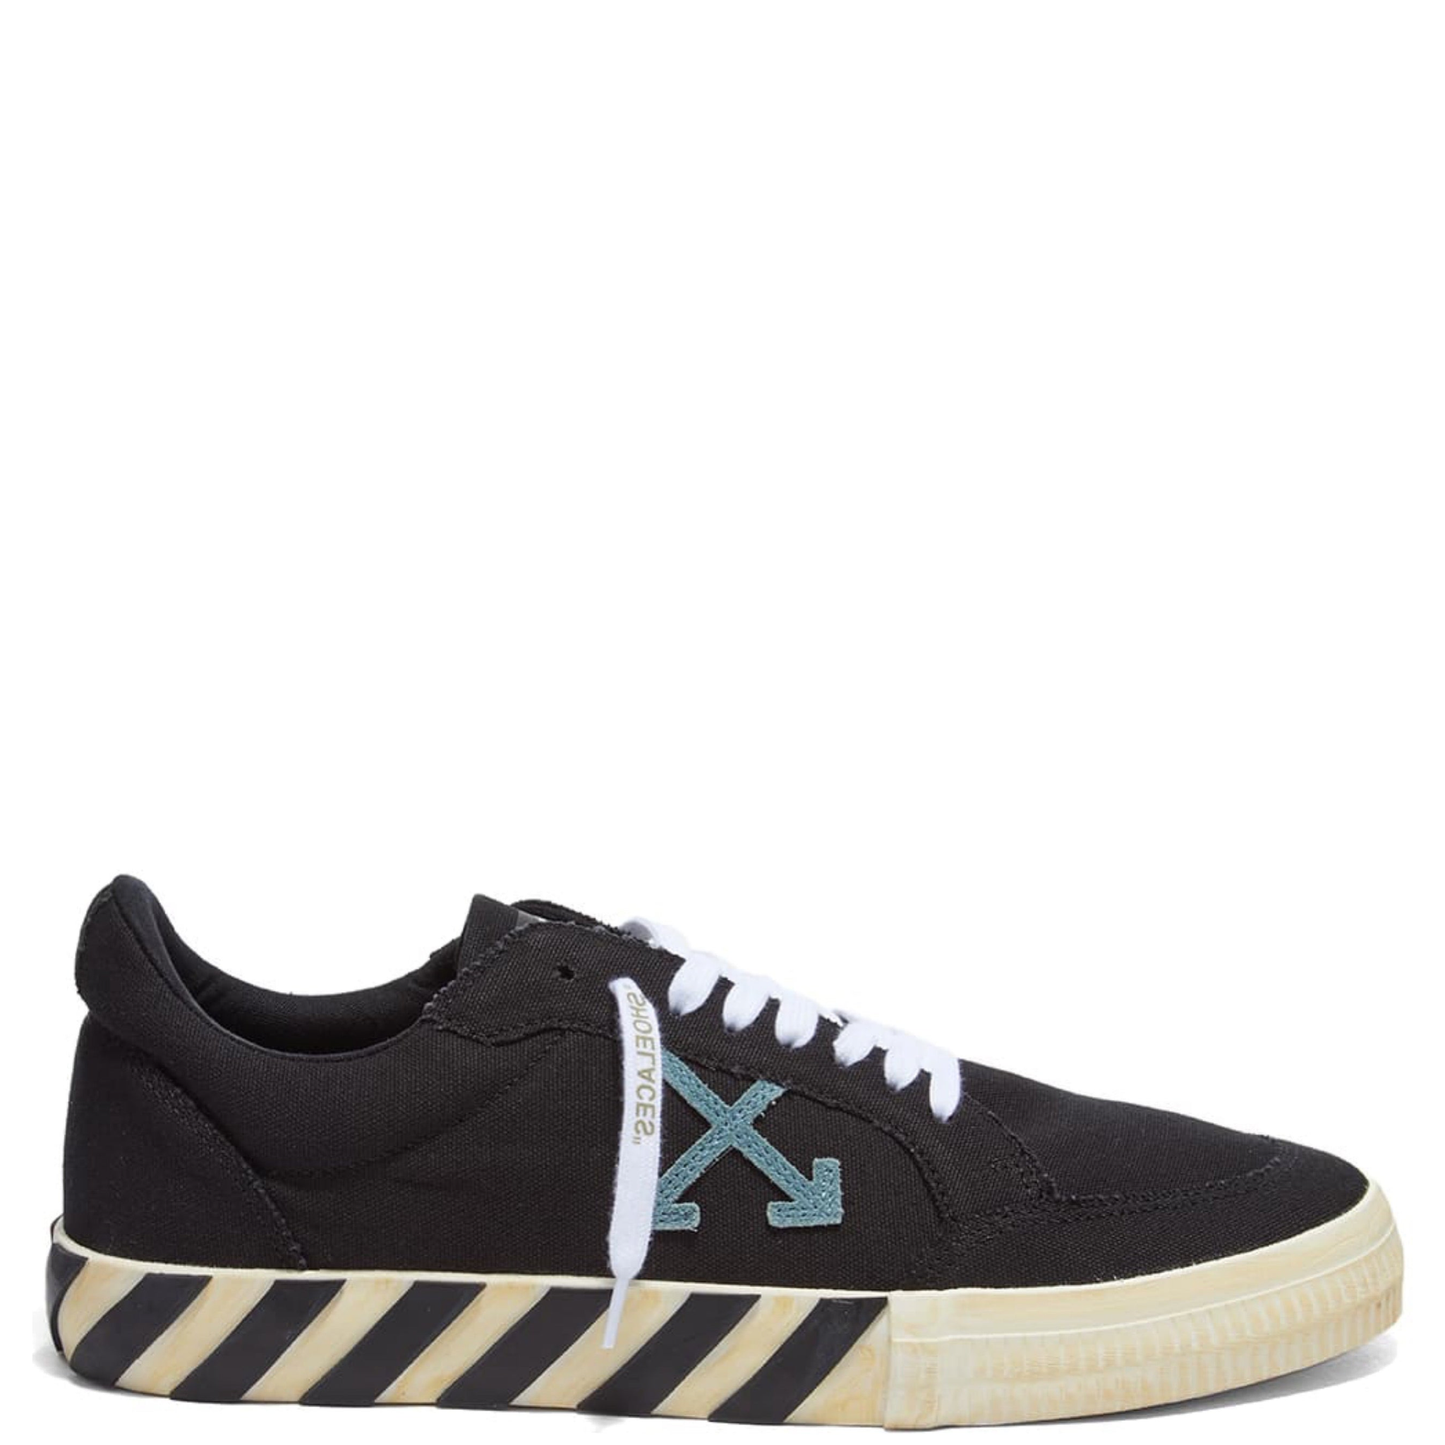 Off-White Black Low Vulc Trainer - DANYOUNGUK